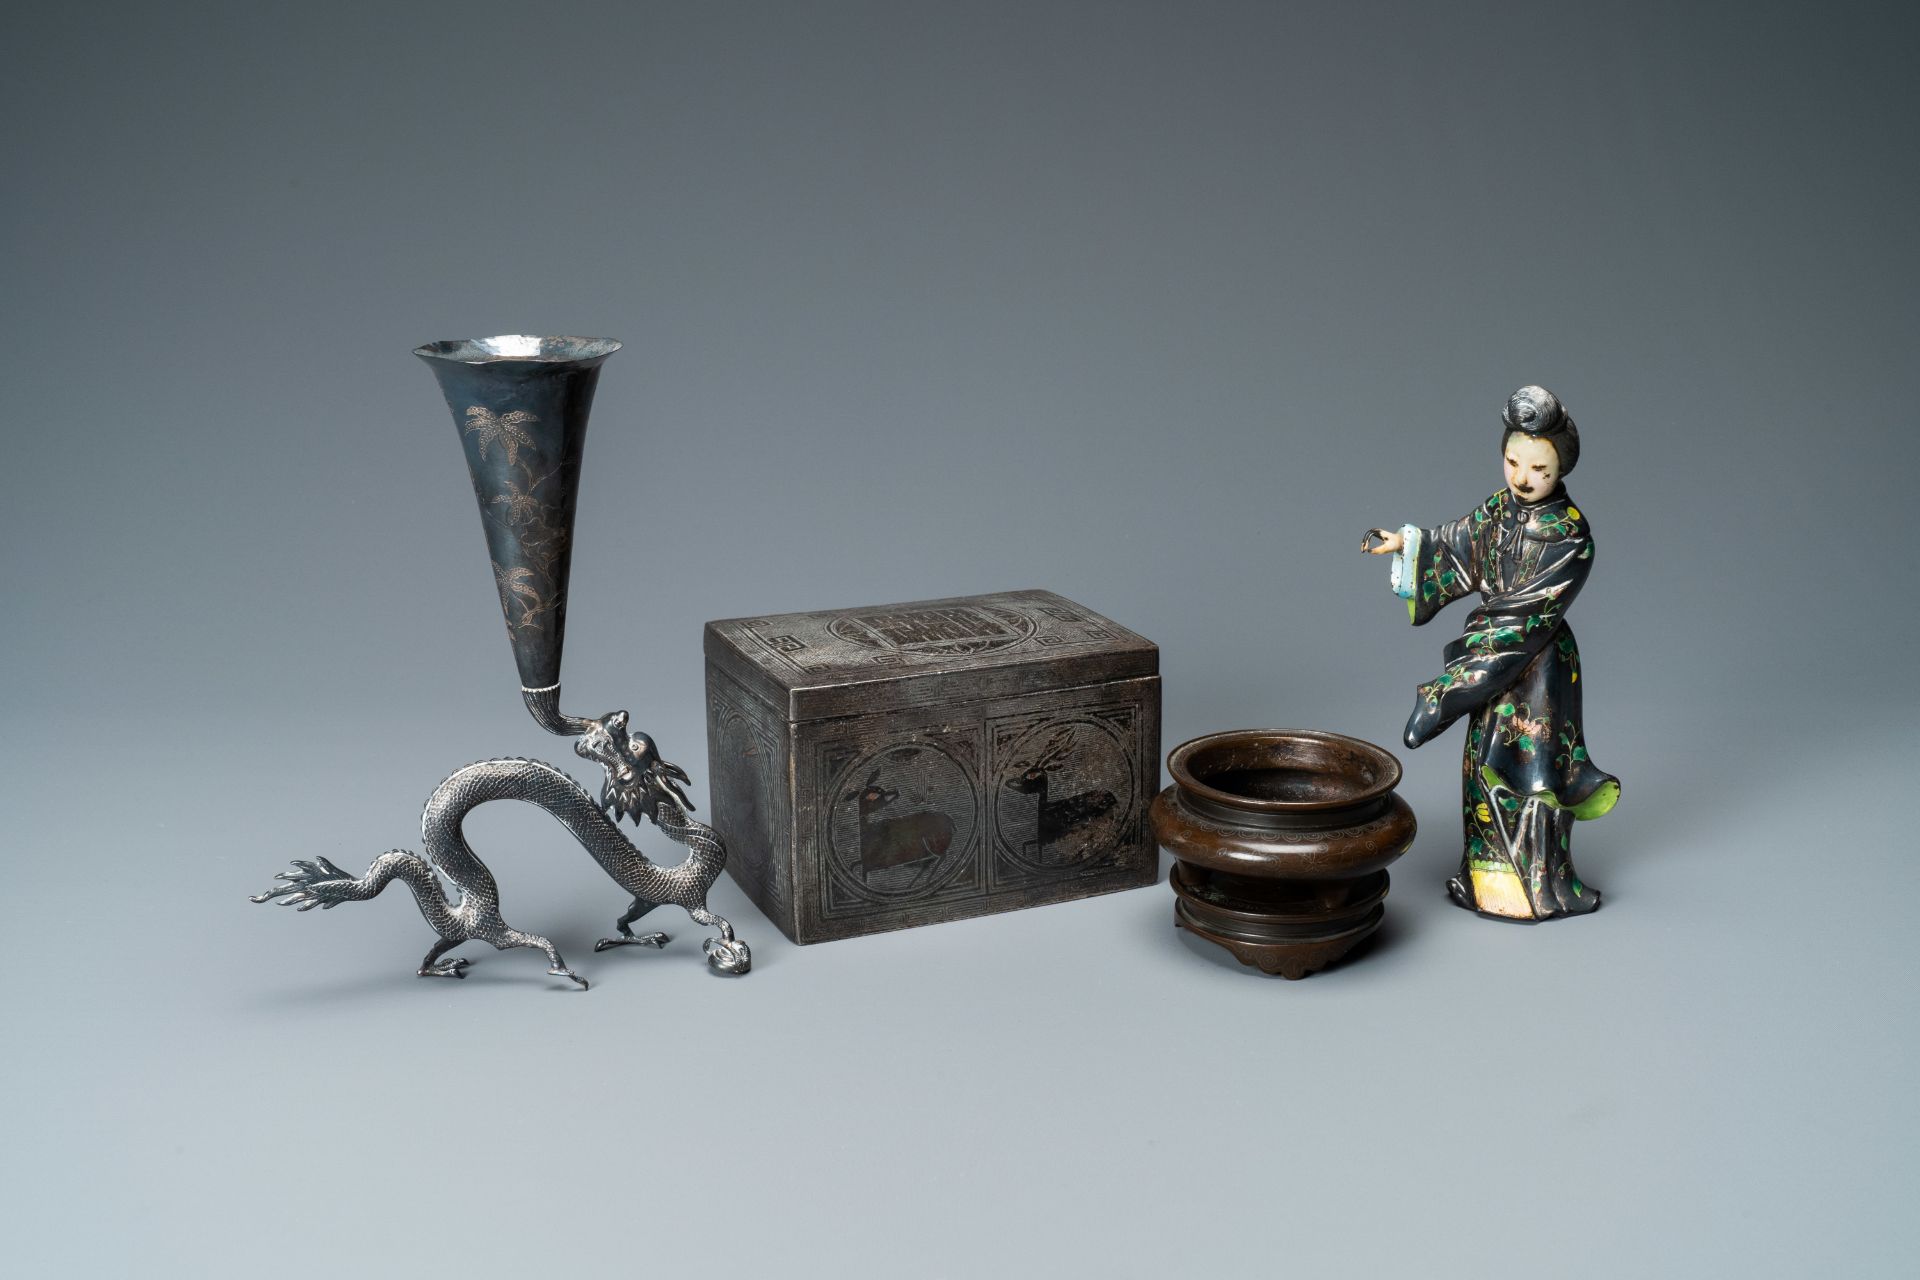 A Chinese enamelled silver figure, a silver vase, a silver-inlaid bronze censer and a silver-plated